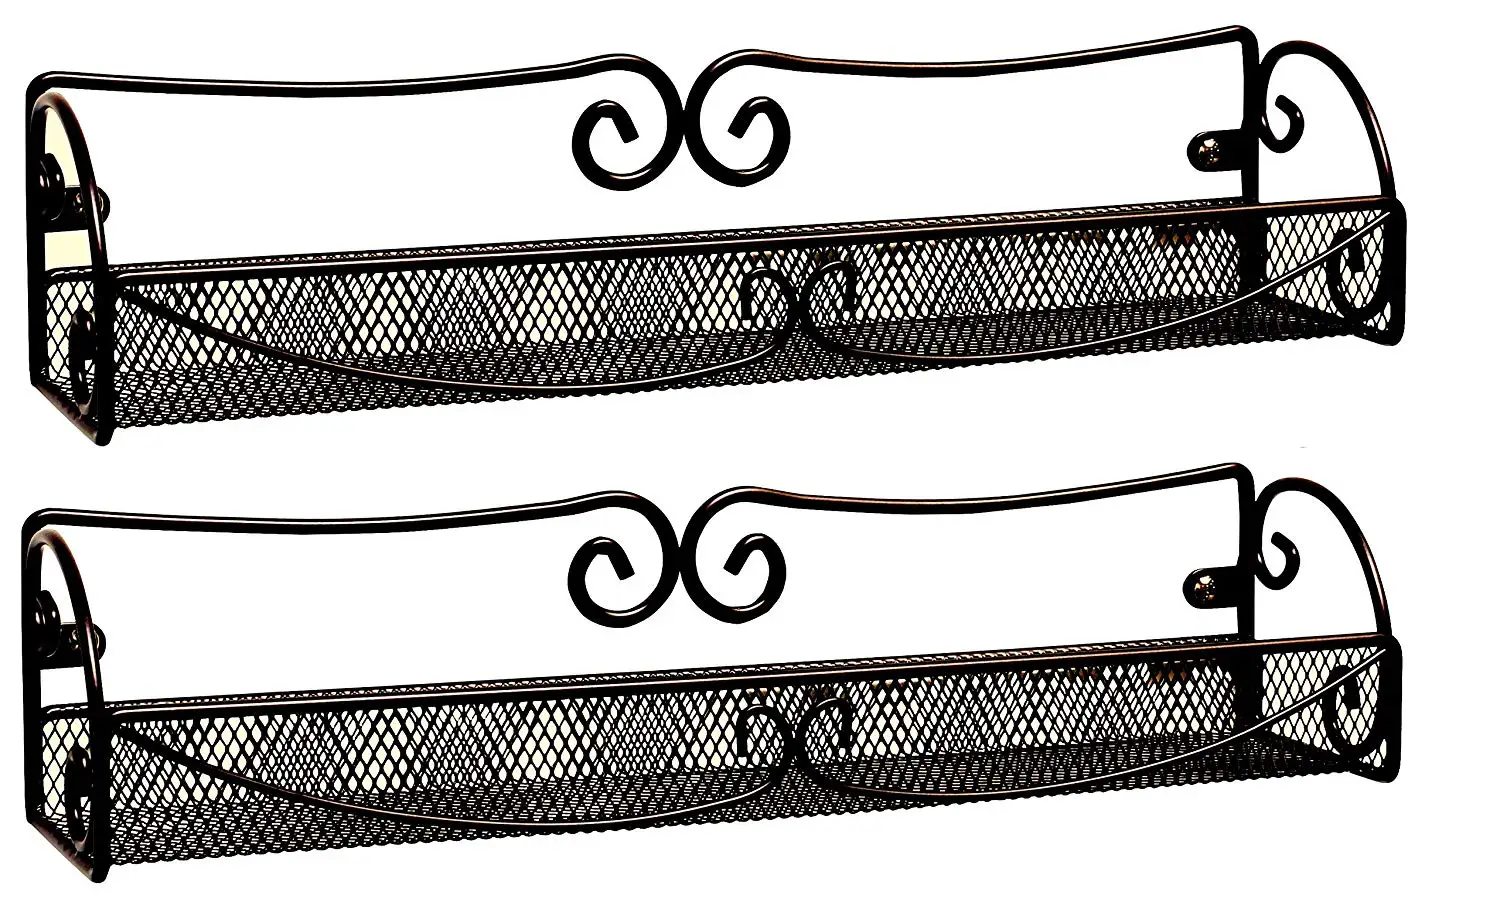 Limited-time discount 2 Pack Wall Mount Single Tier Mesh iron black Spice Rack